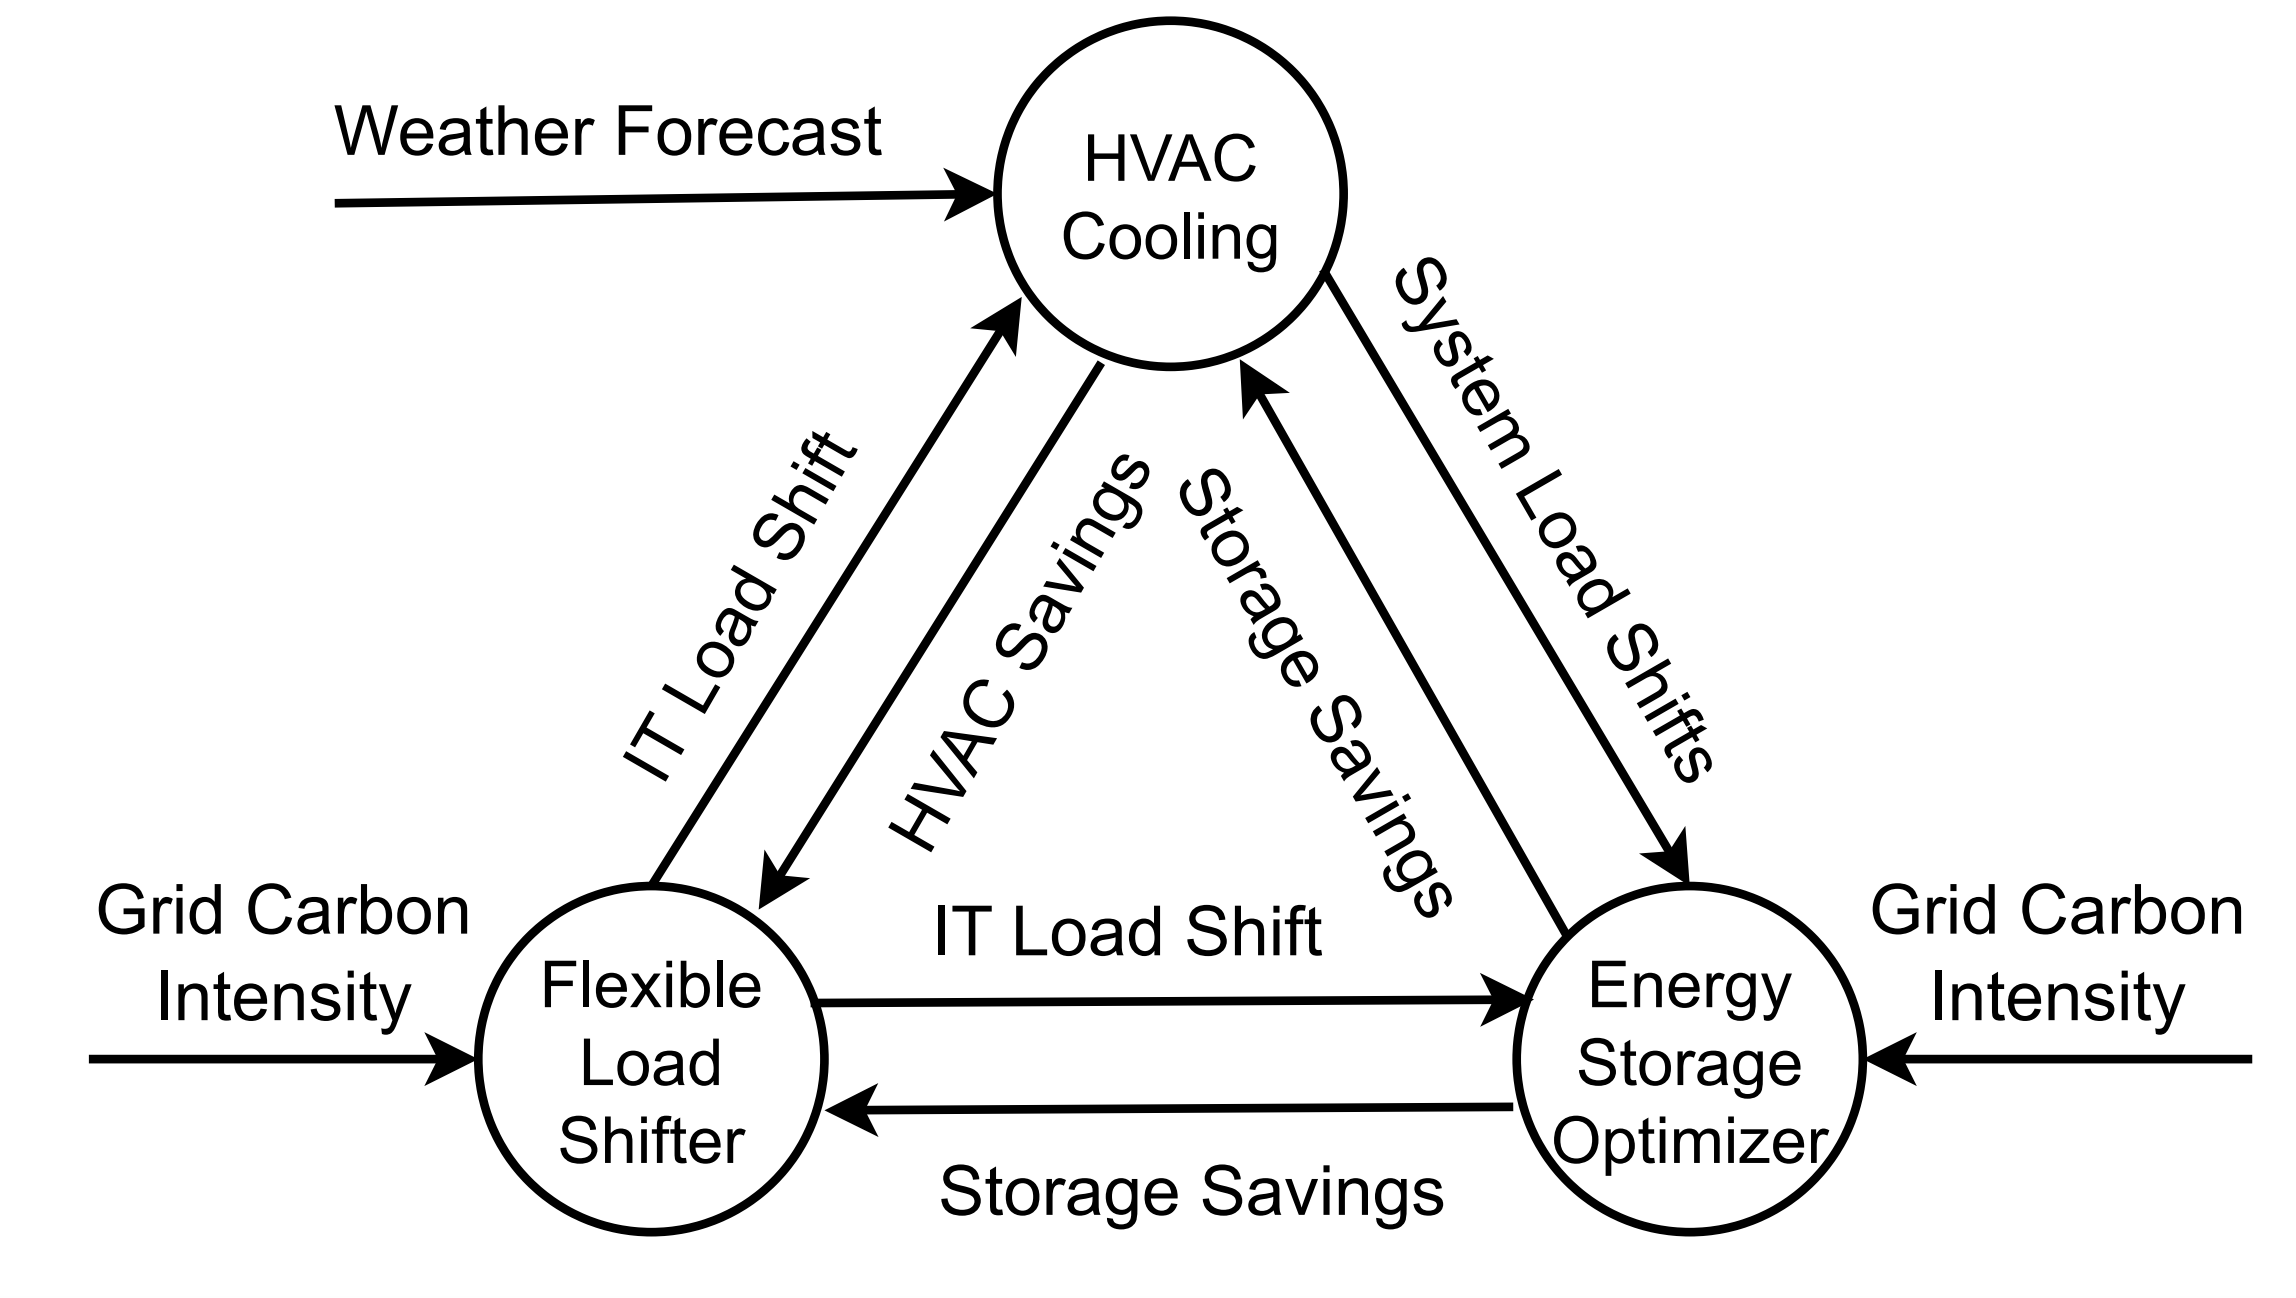 Figure 3 from Sarkar et al., 2023. It shows a system map of how HVAC Cooling, Flexible Load Shifter, and Energy Storage Optimizer interact.